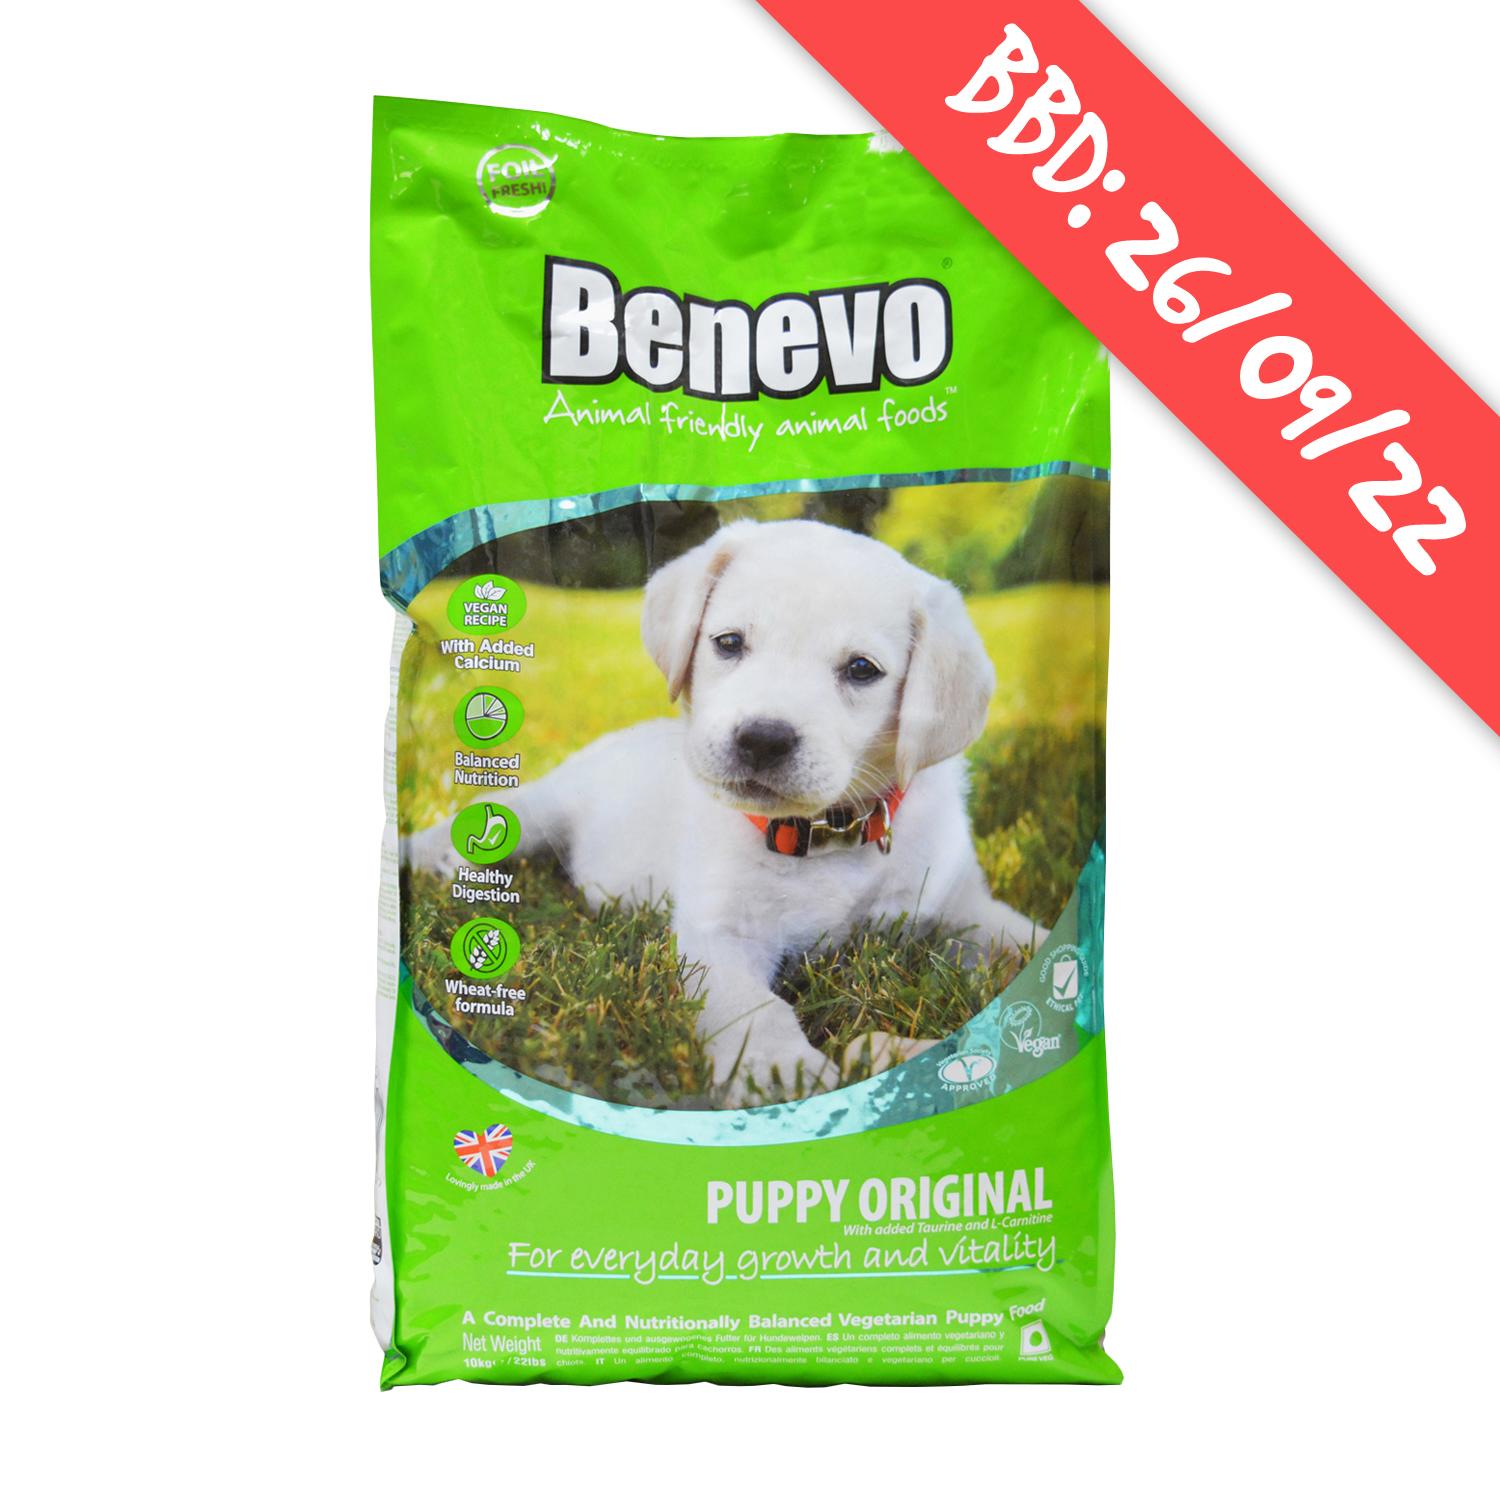 A picture of a discounted Bag of Benevo Vegan Puppy Food